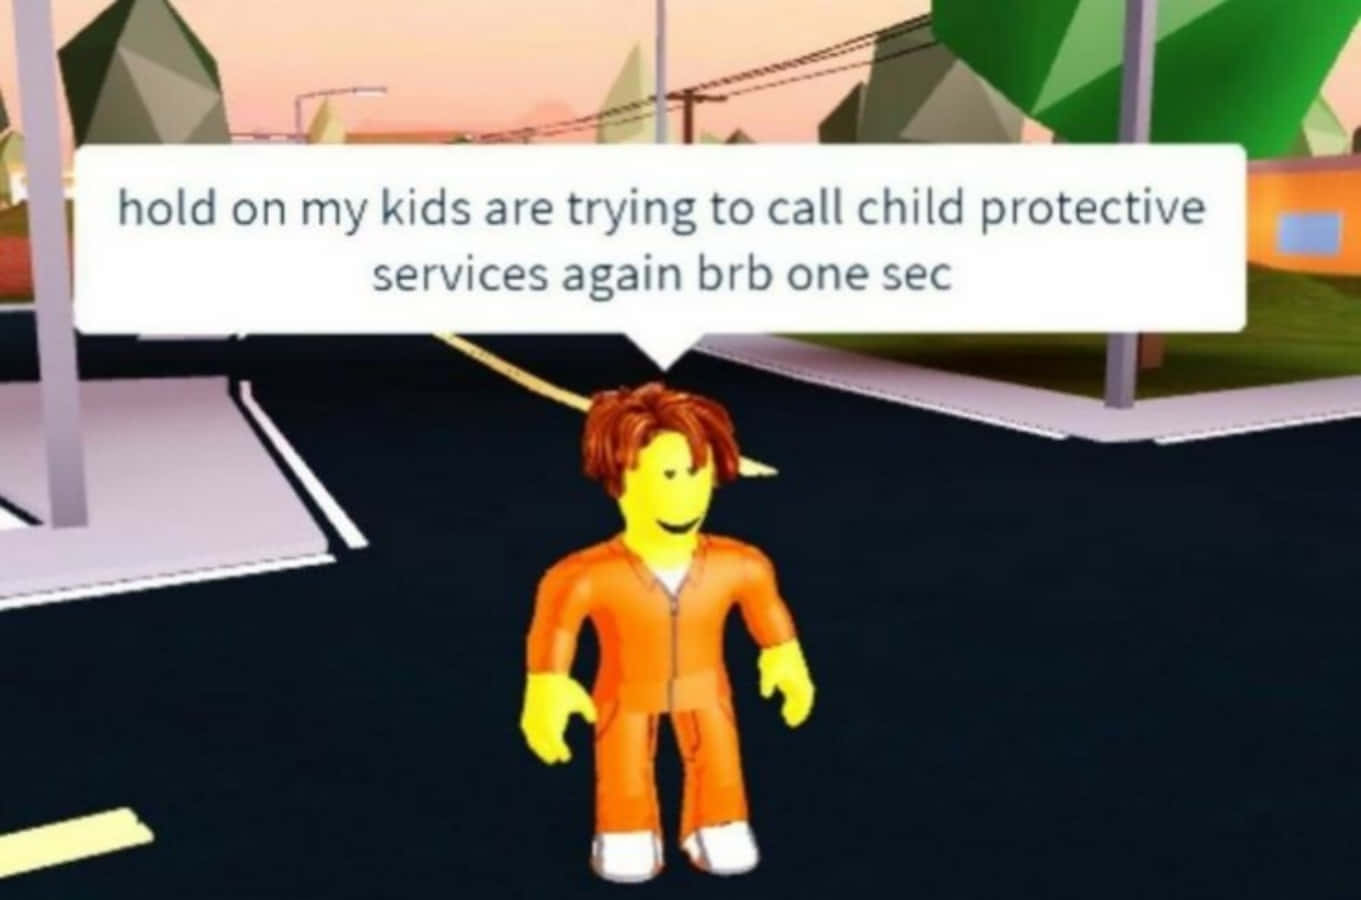 100+] Funny Roblox Pictures